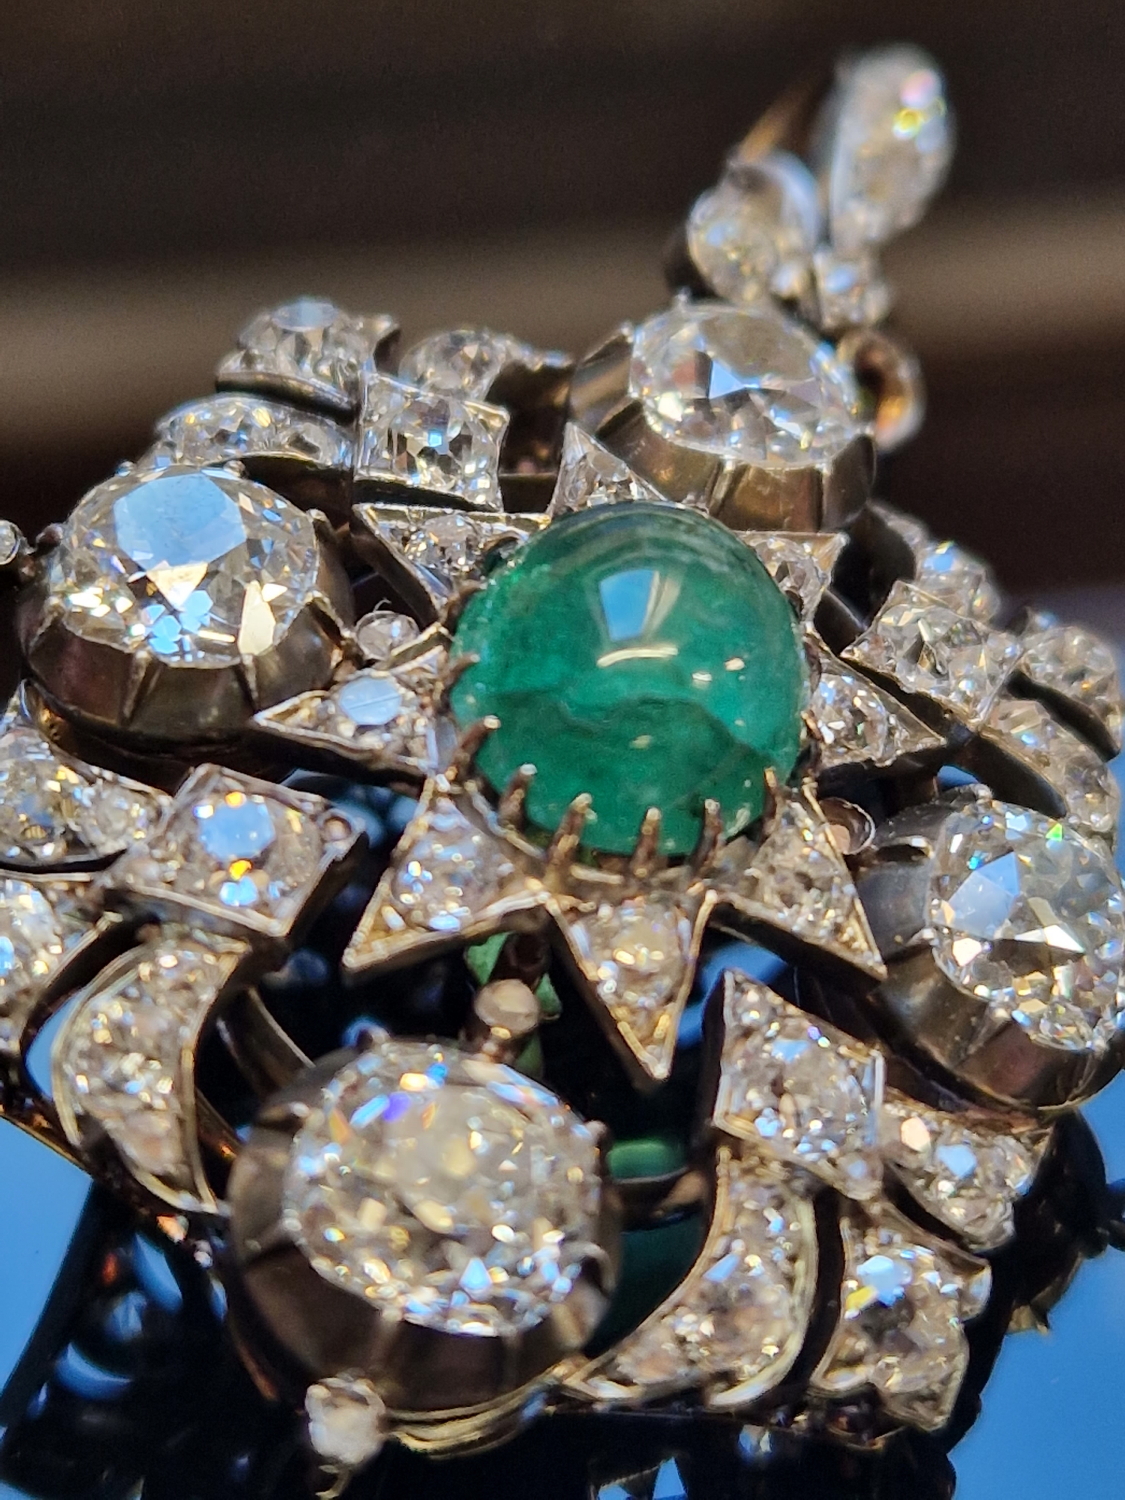 AN ANTIQUE OLD CUT DIAMOND AND EMERALD PENDANT BROOCH. THE PENDANT CENTRED WITH AN OVAL CABOCHON - Image 4 of 9